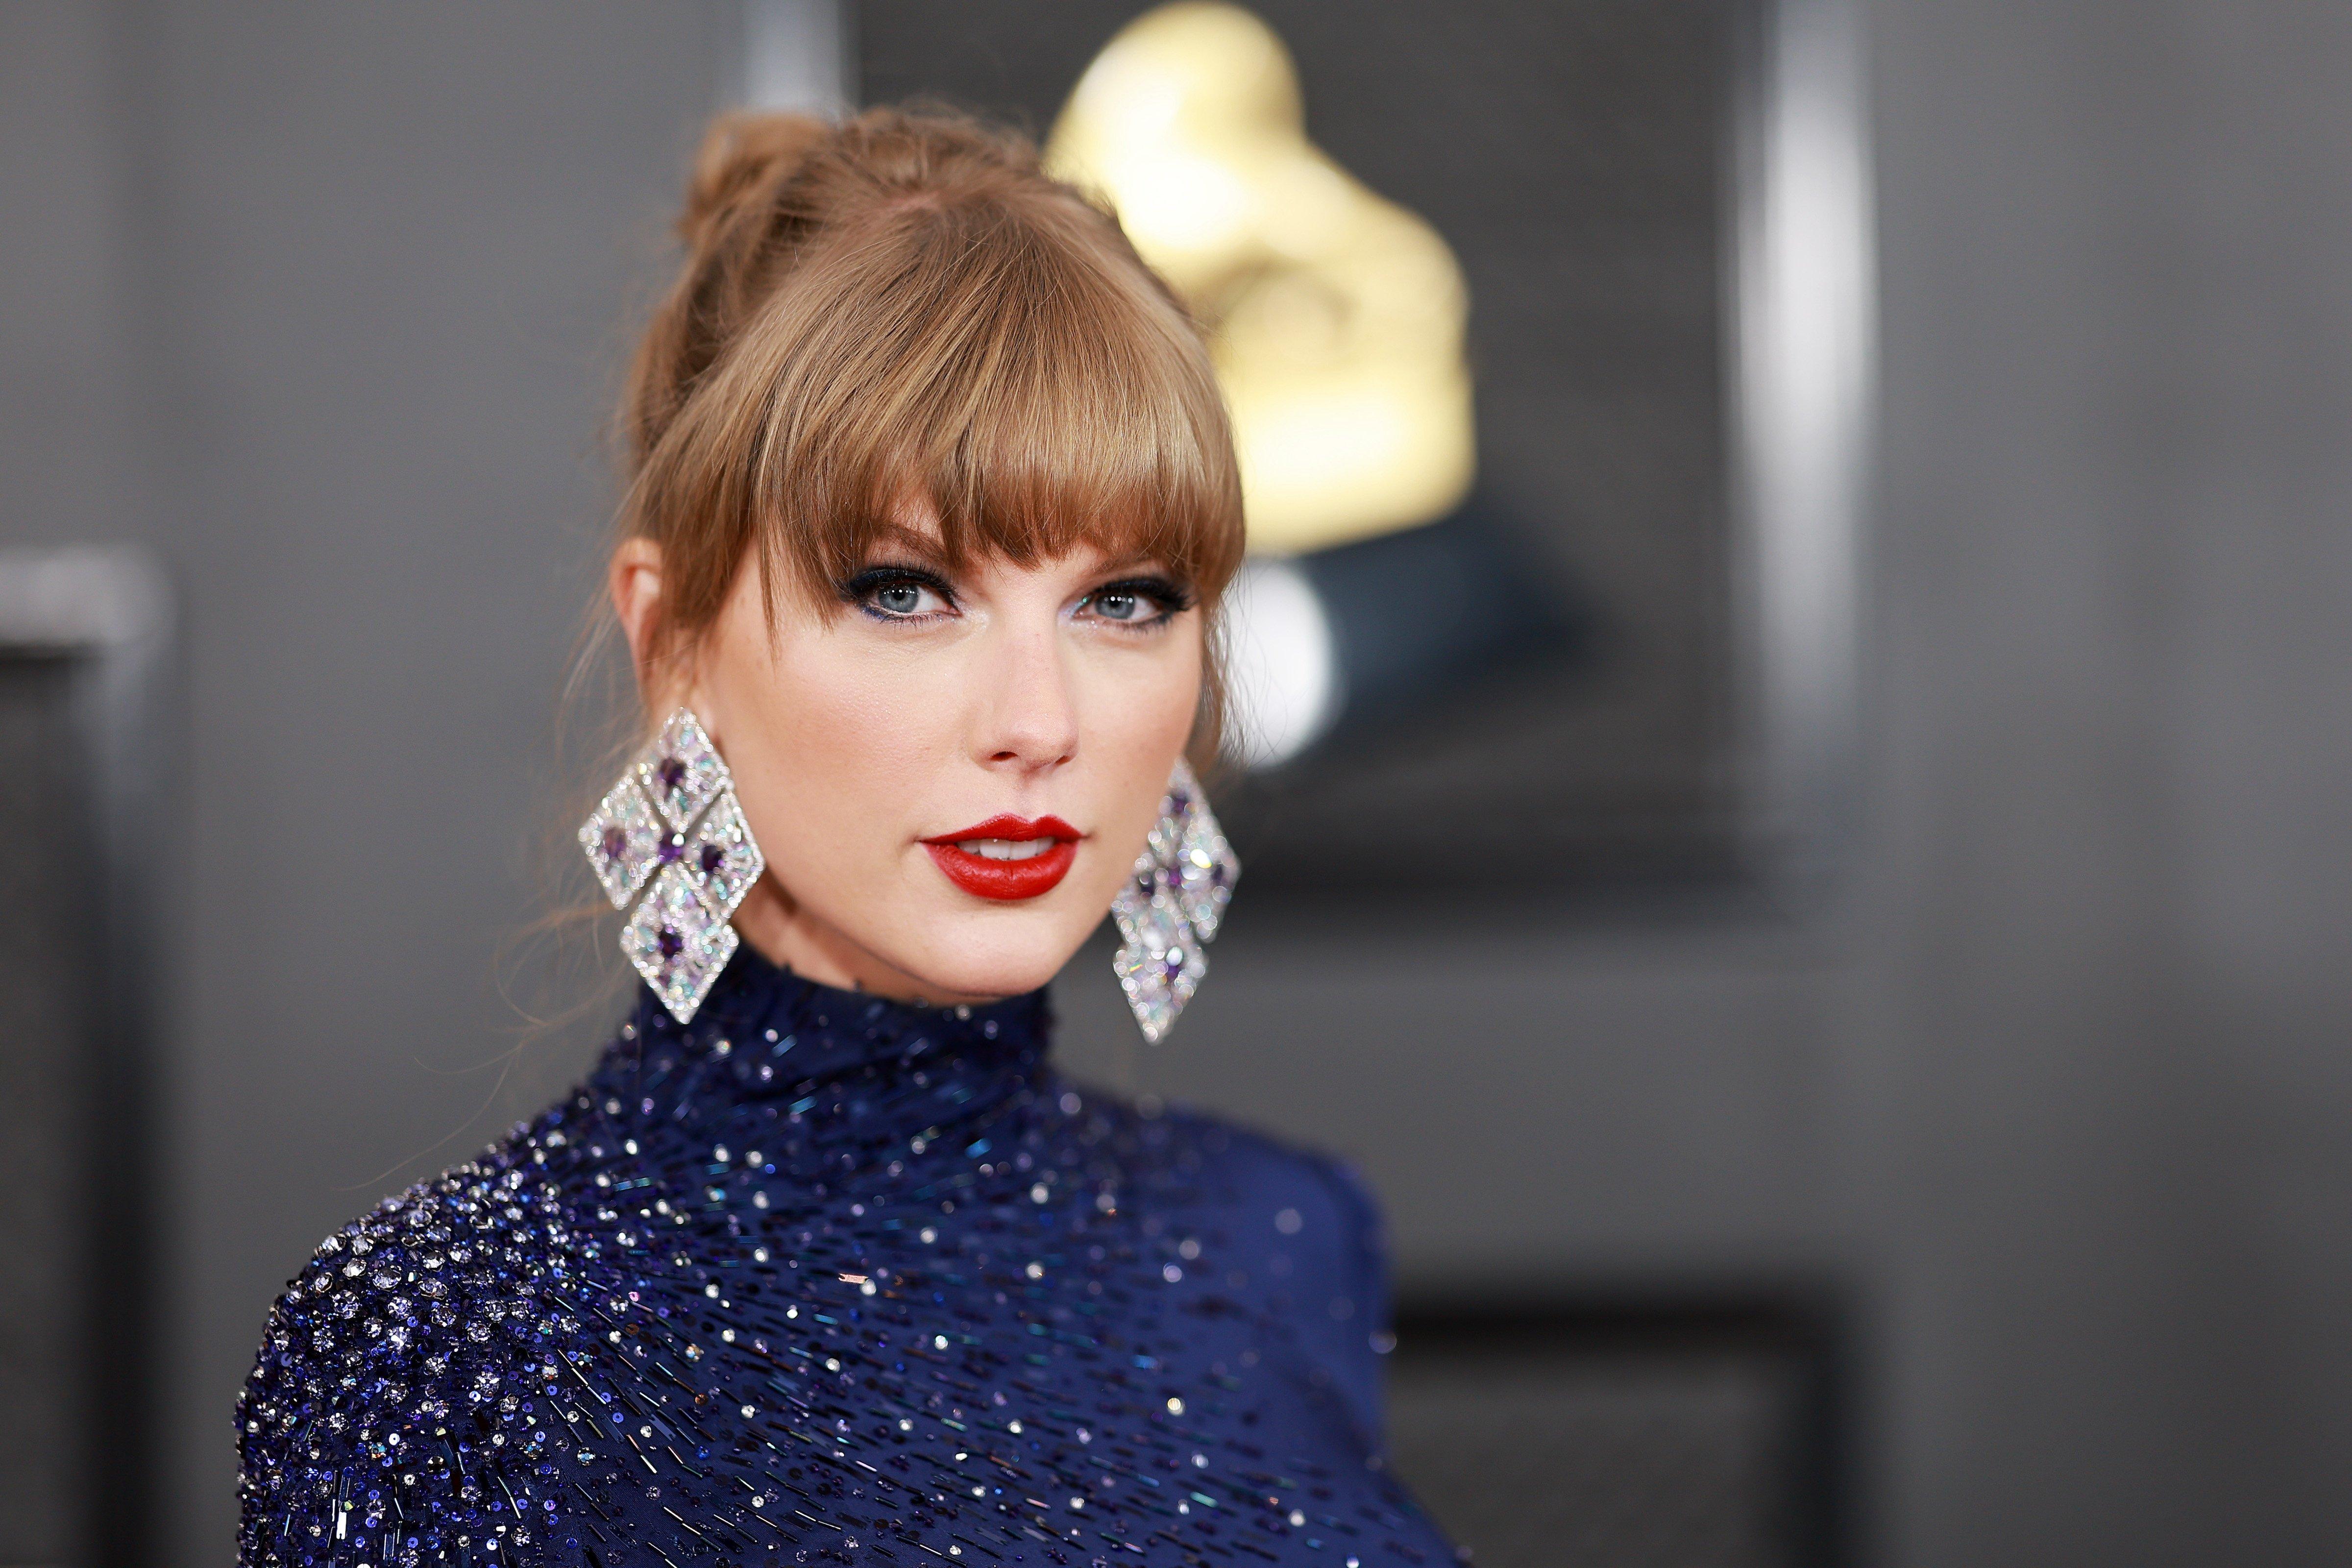 Taylor Swift Makes GRAMMY History (Again) With Best Music Video Win